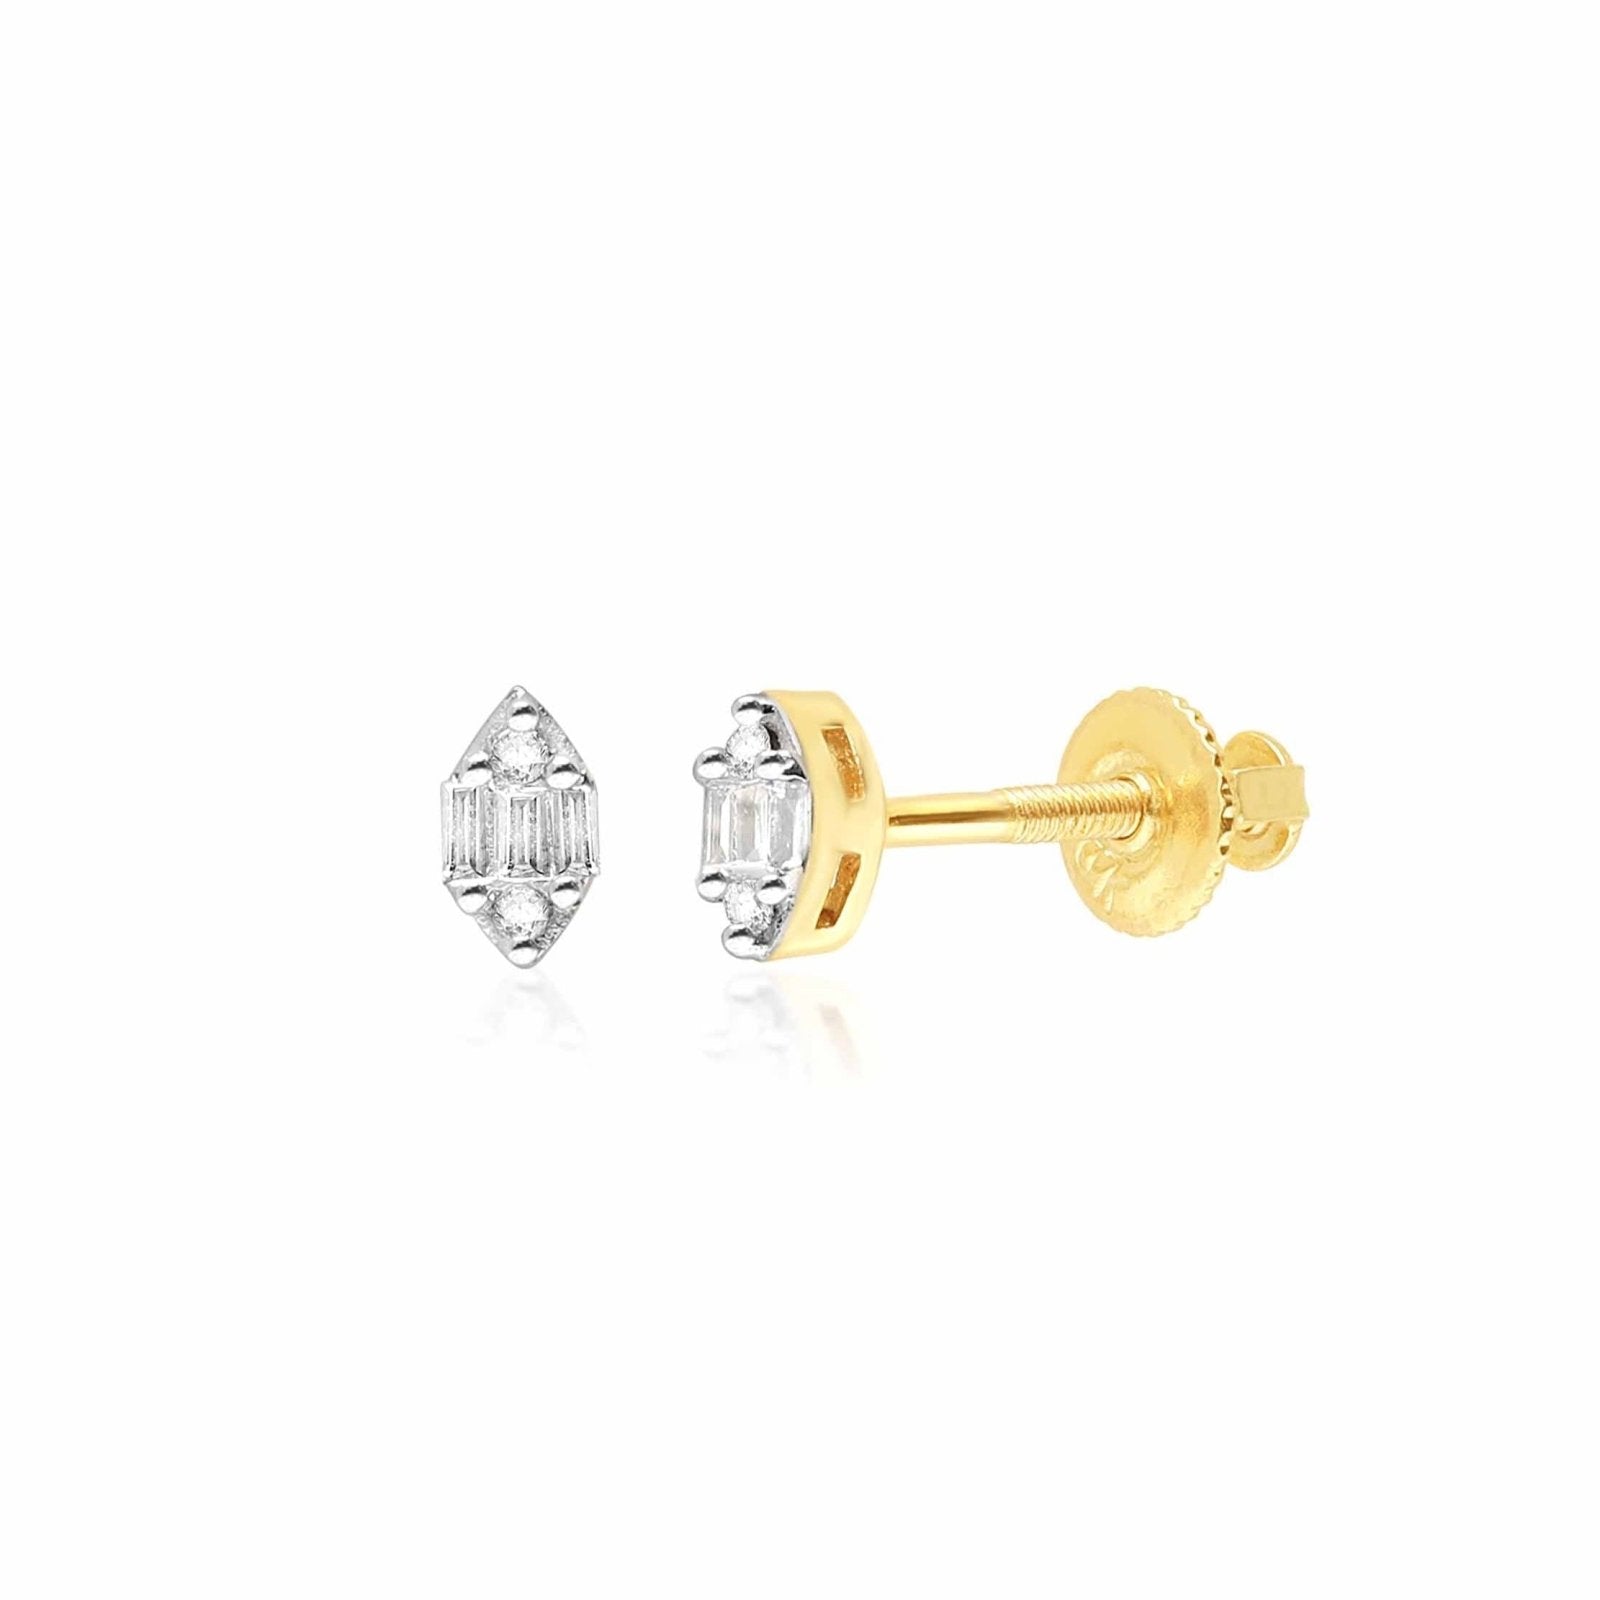 Marquise Mixed Diamond Screw Back Earrings Earrings Estella Collection #product_description# 14k Birthstone Birthstone Earrings #tag4# #tag5# #tag6# #tag7# #tag8# #tag9# #tag10#